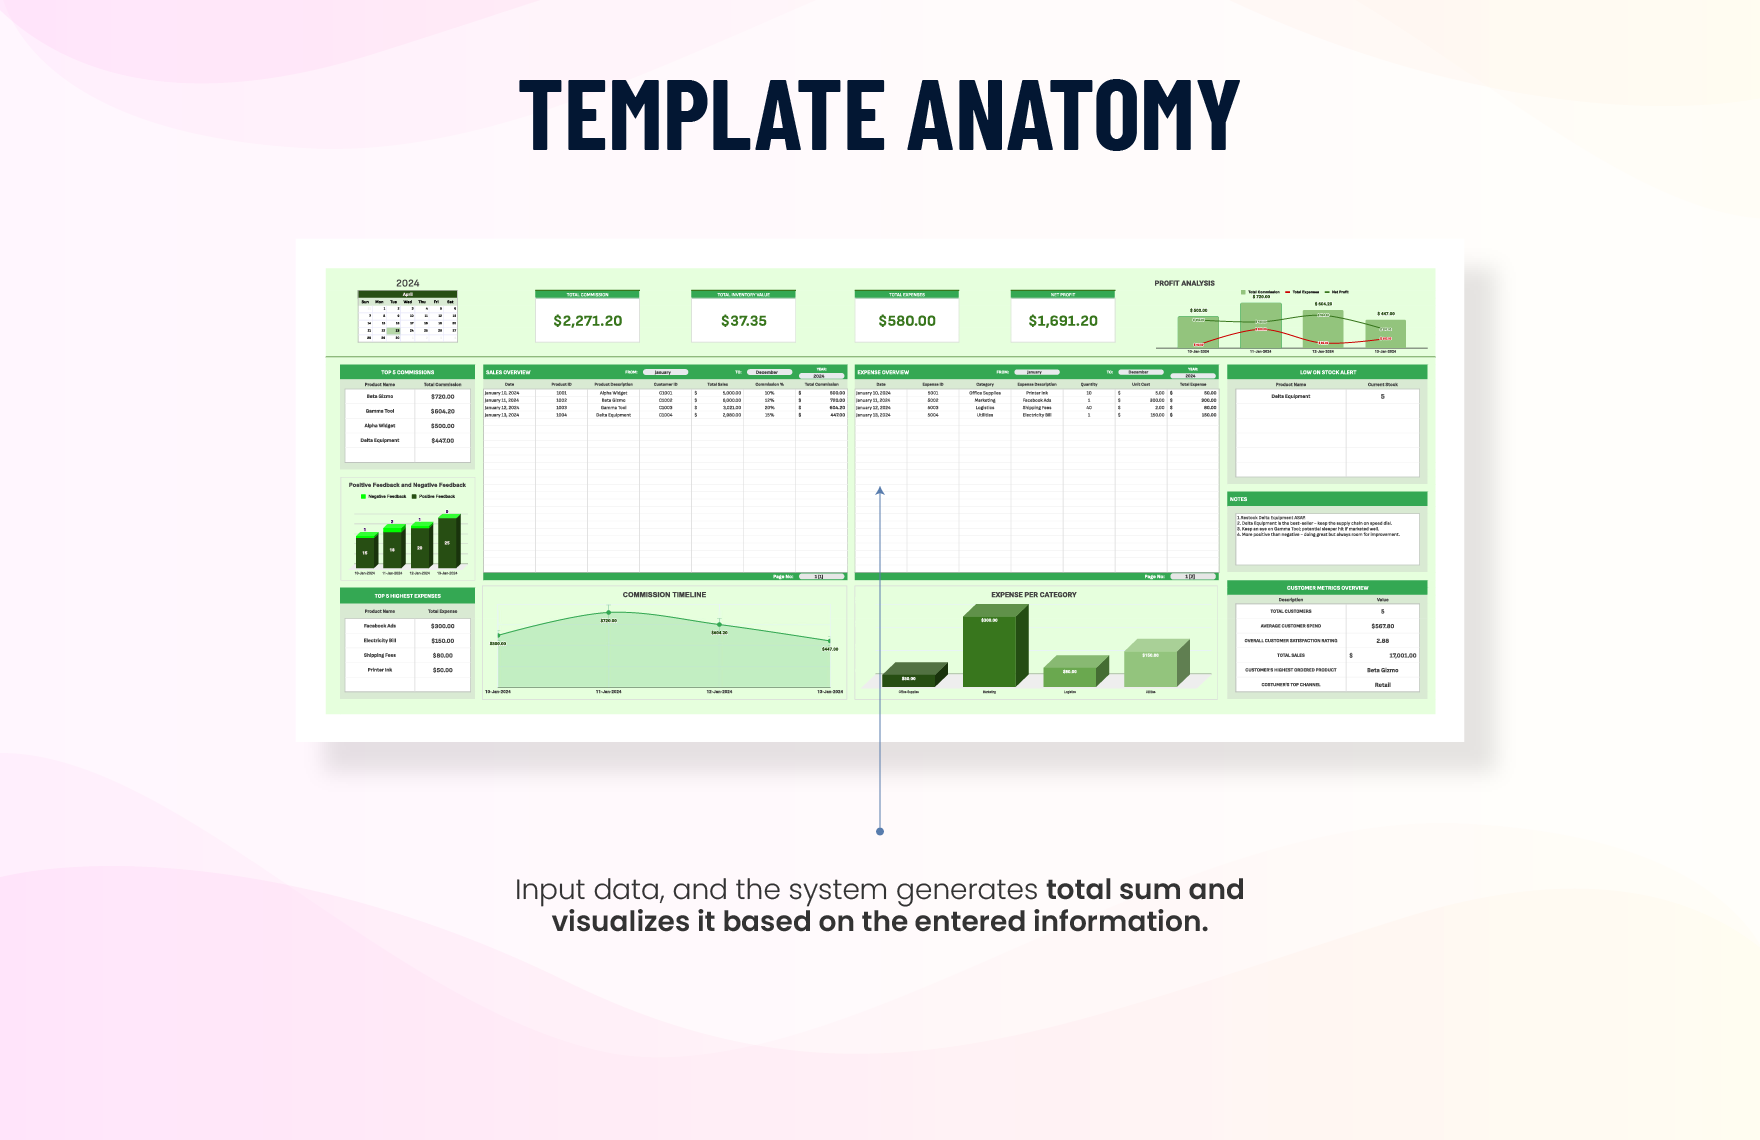 Sales Monthly Commission Tracker Template